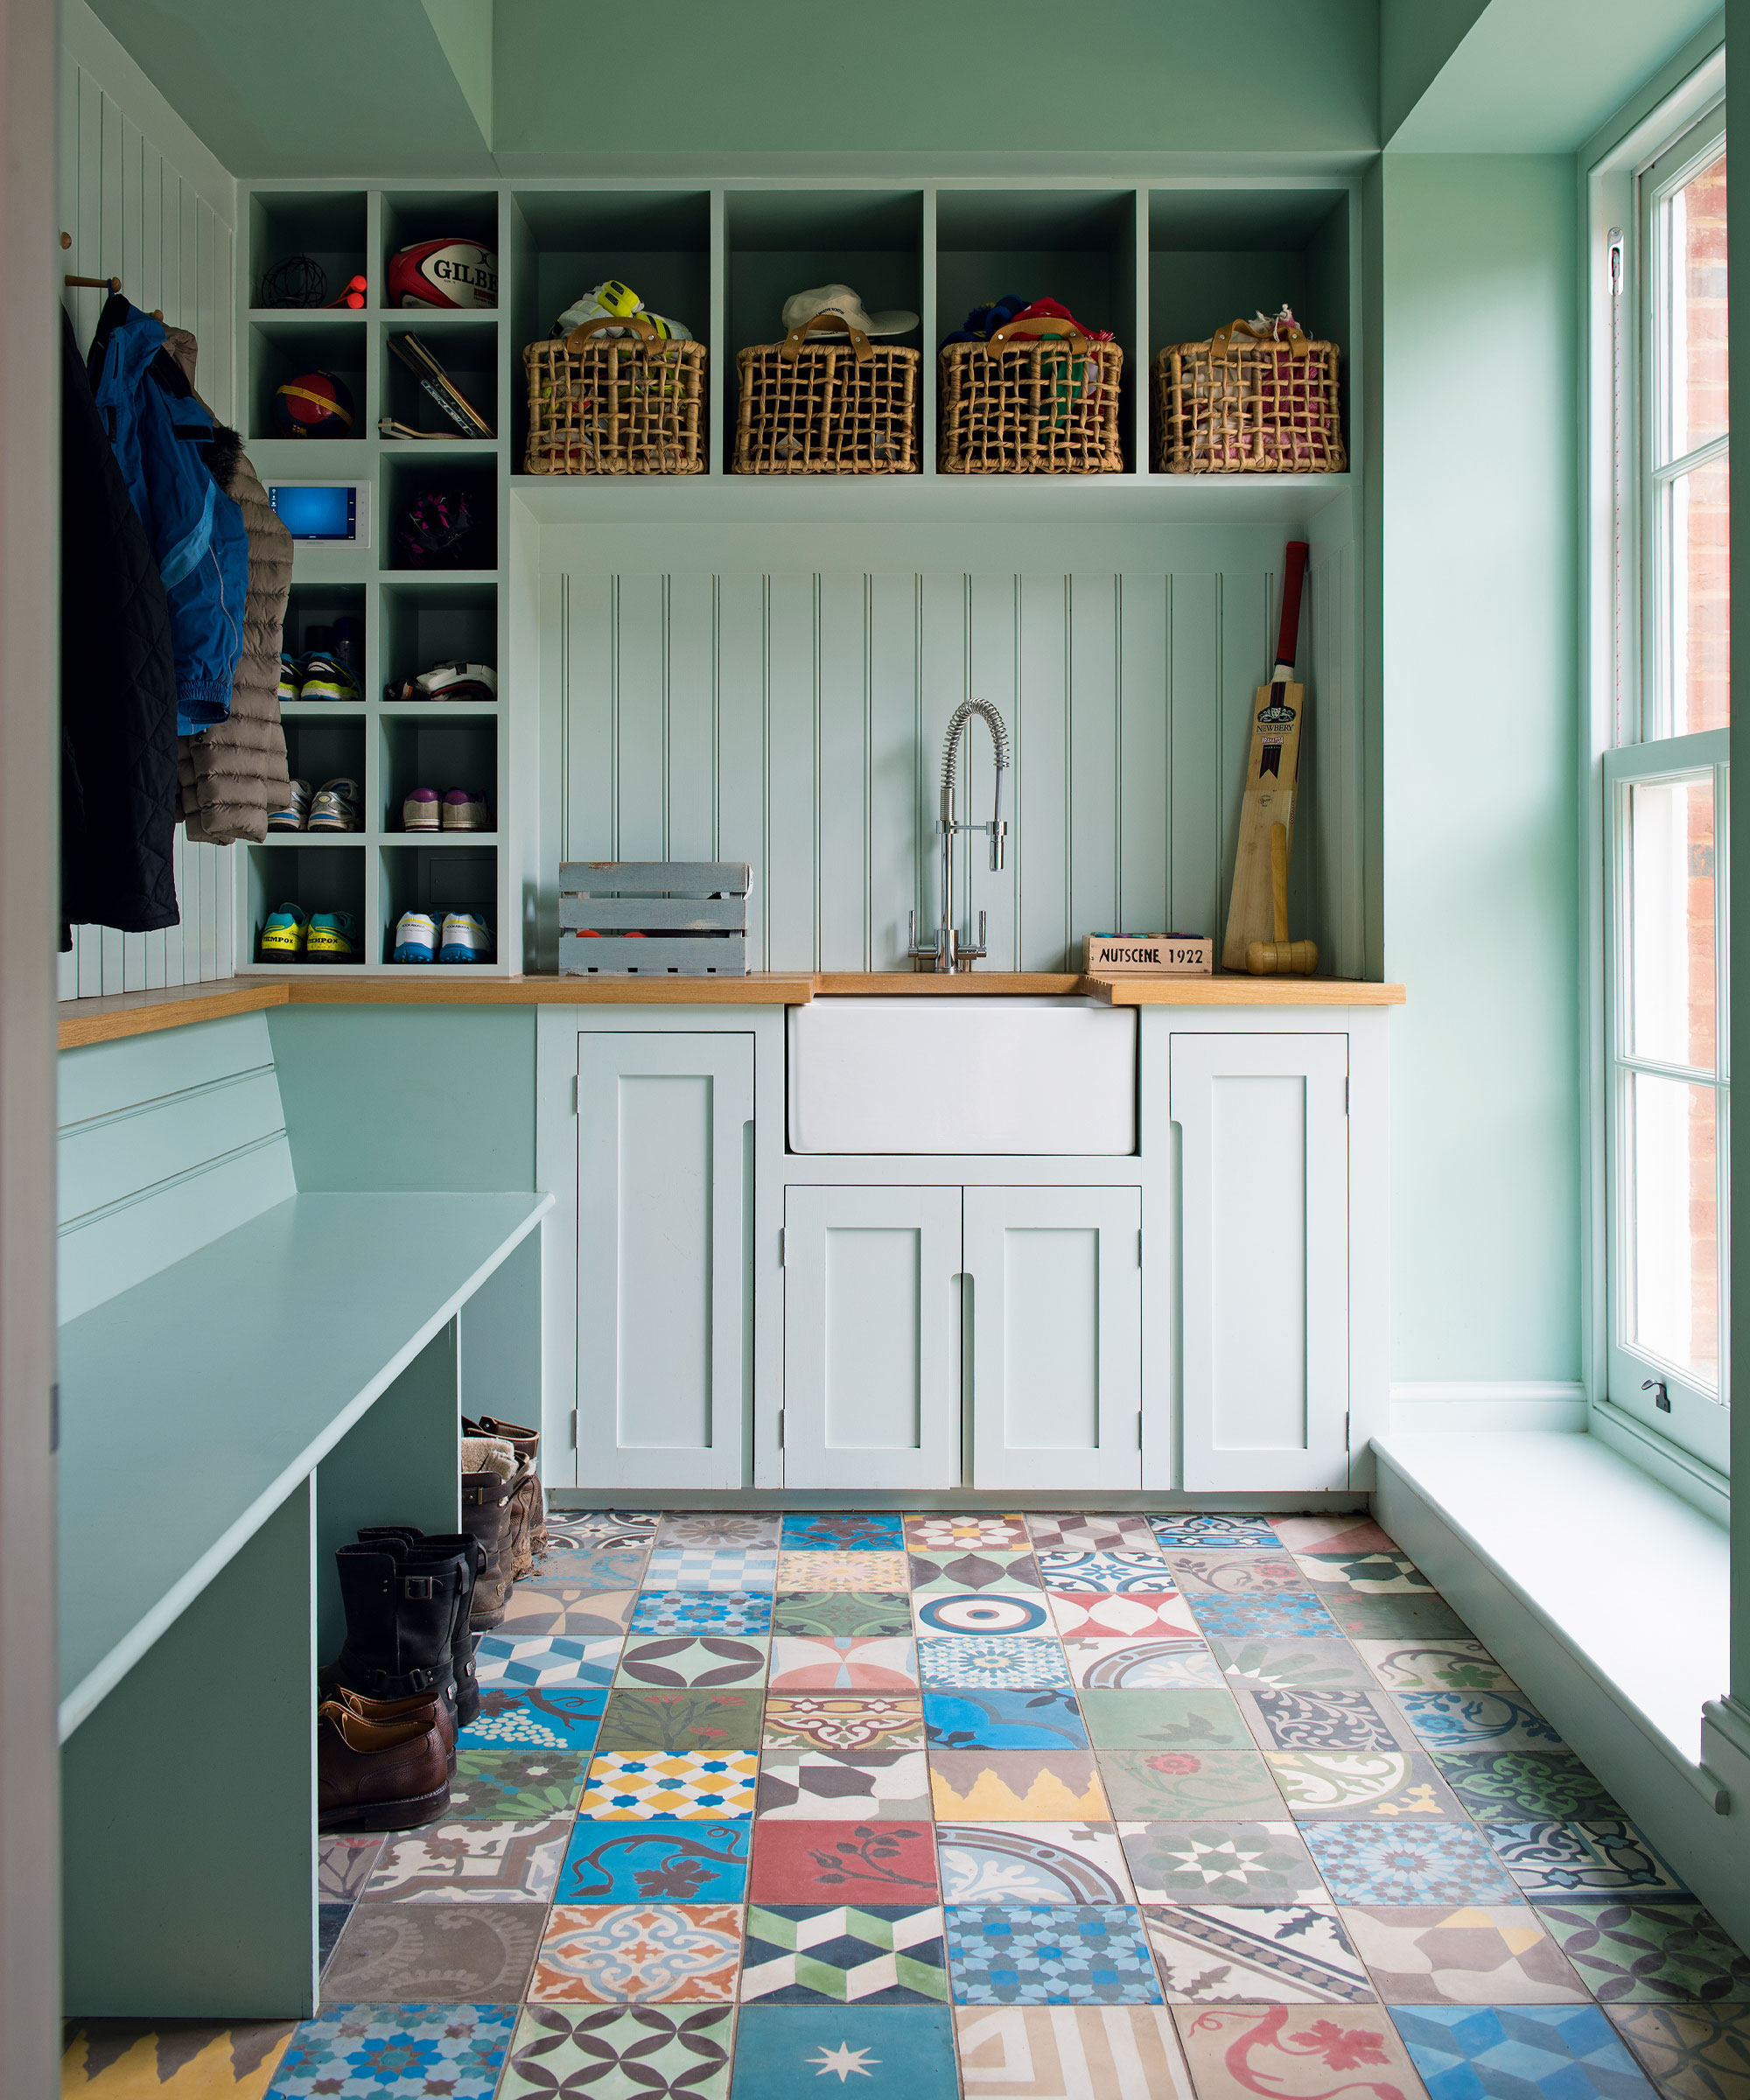 Boot room with eye-catching tiles in patchwork design. Blue painted walls, cabinets and bench, wicker storage baskets, sink